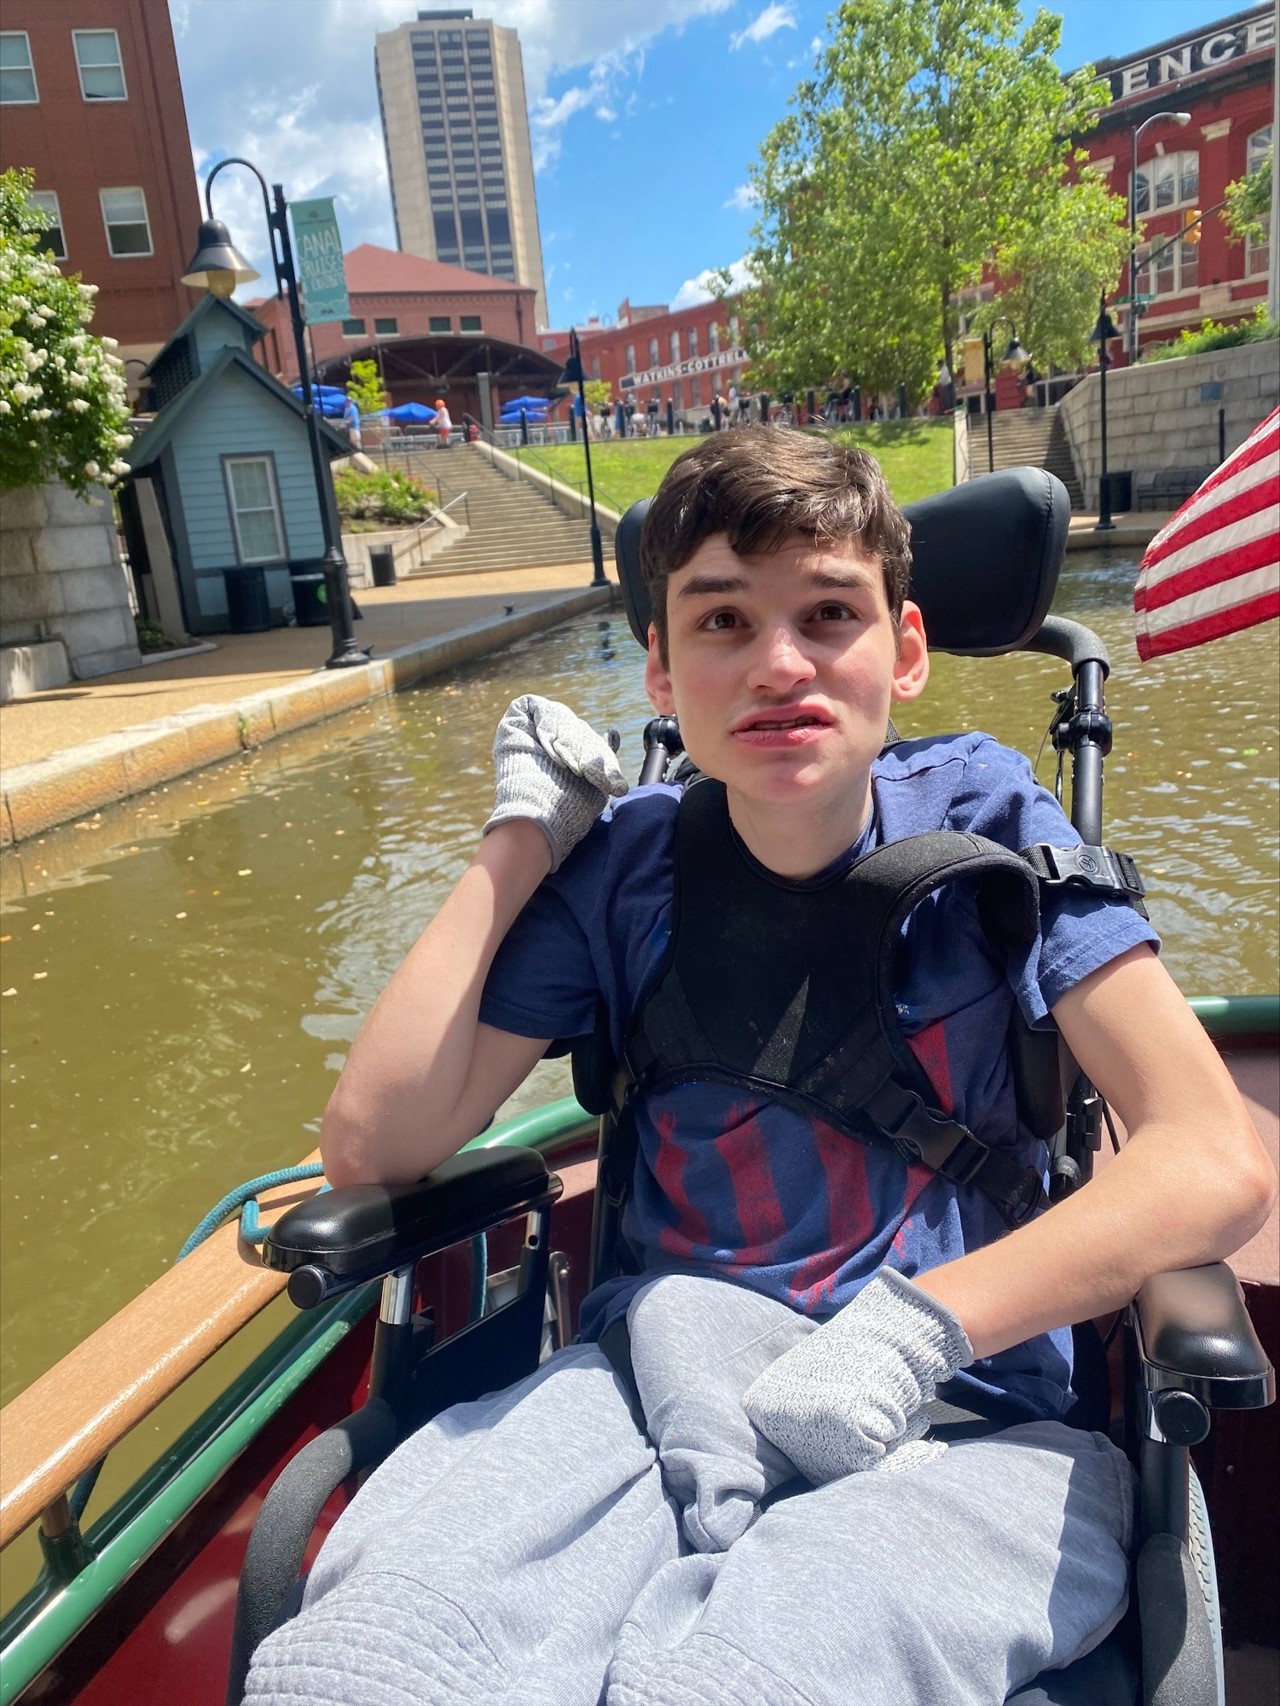 A young man is sitting in a wheelchair on a boat during a canal cruise. He is wearing a navy blue t-shirt, grey pants, and gloves. The background shows a waterway with buildings, trees, and a clear blue sky with a few clouds. An American flag is partially visible on the right side.